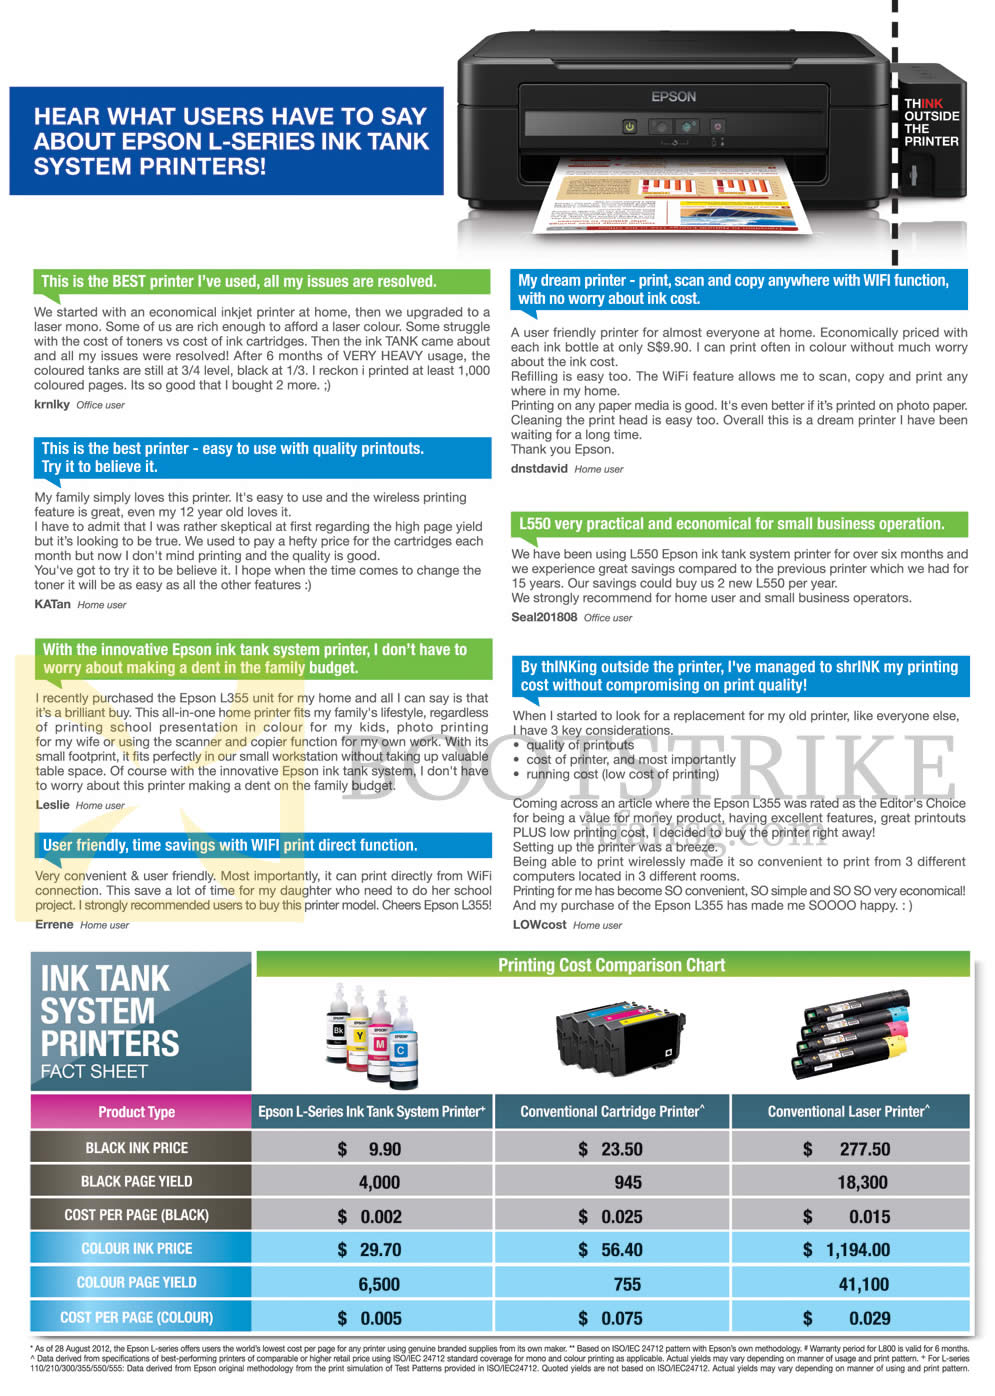 COMEX 2014 price list image brochure of Epson Inktank System Printers Printing Cost Comparison Chart